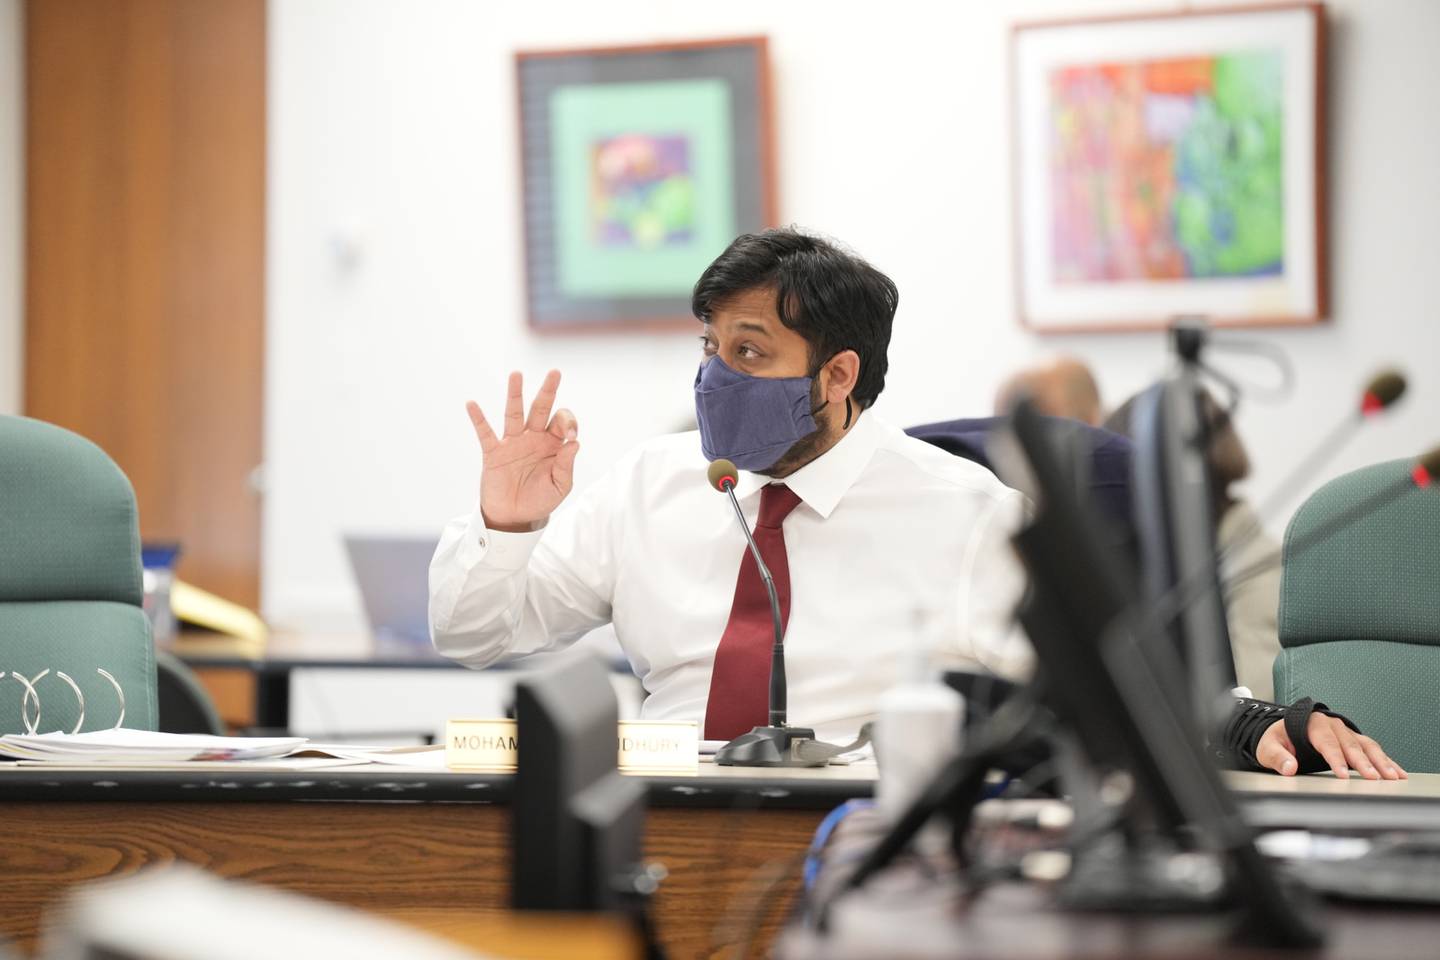 Mohammed Choudhury, state school superintendent, during a state school board meeting on February 28, 2023.